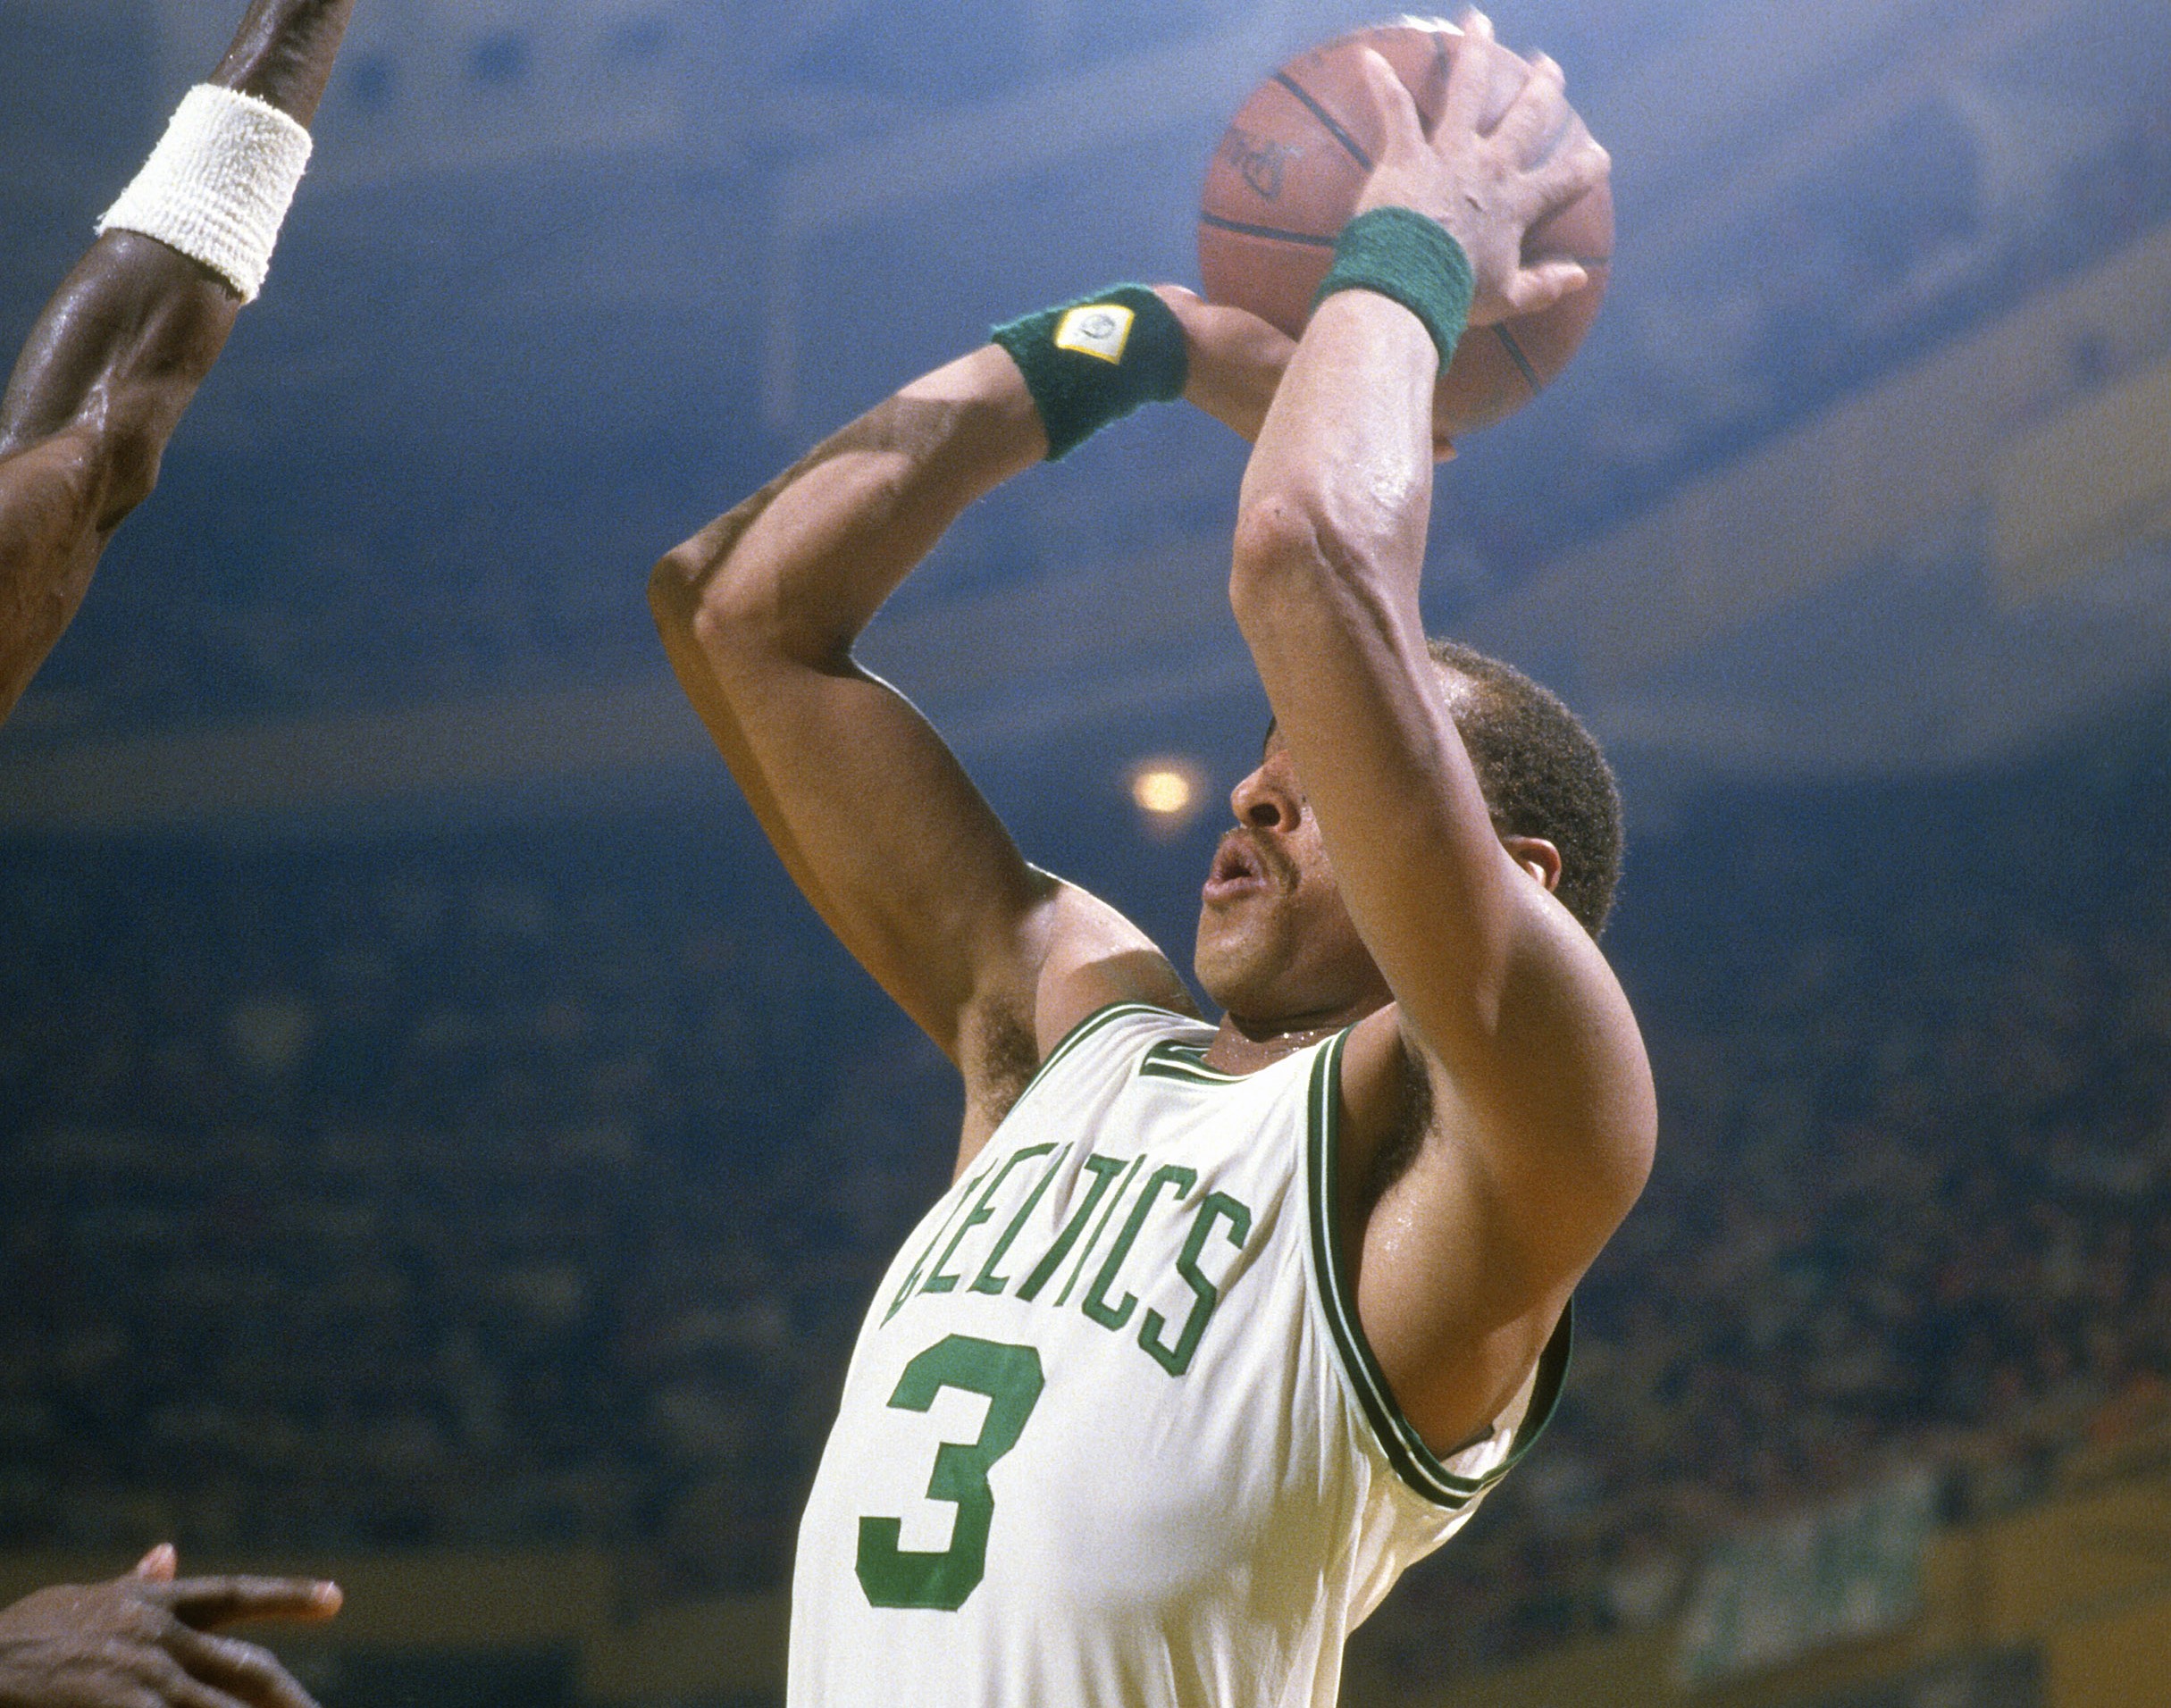 Dennis Johnson's Best Moment With the Boston Celtics Came During Training Camp in '83 Before He Ever Played a Game With the Team